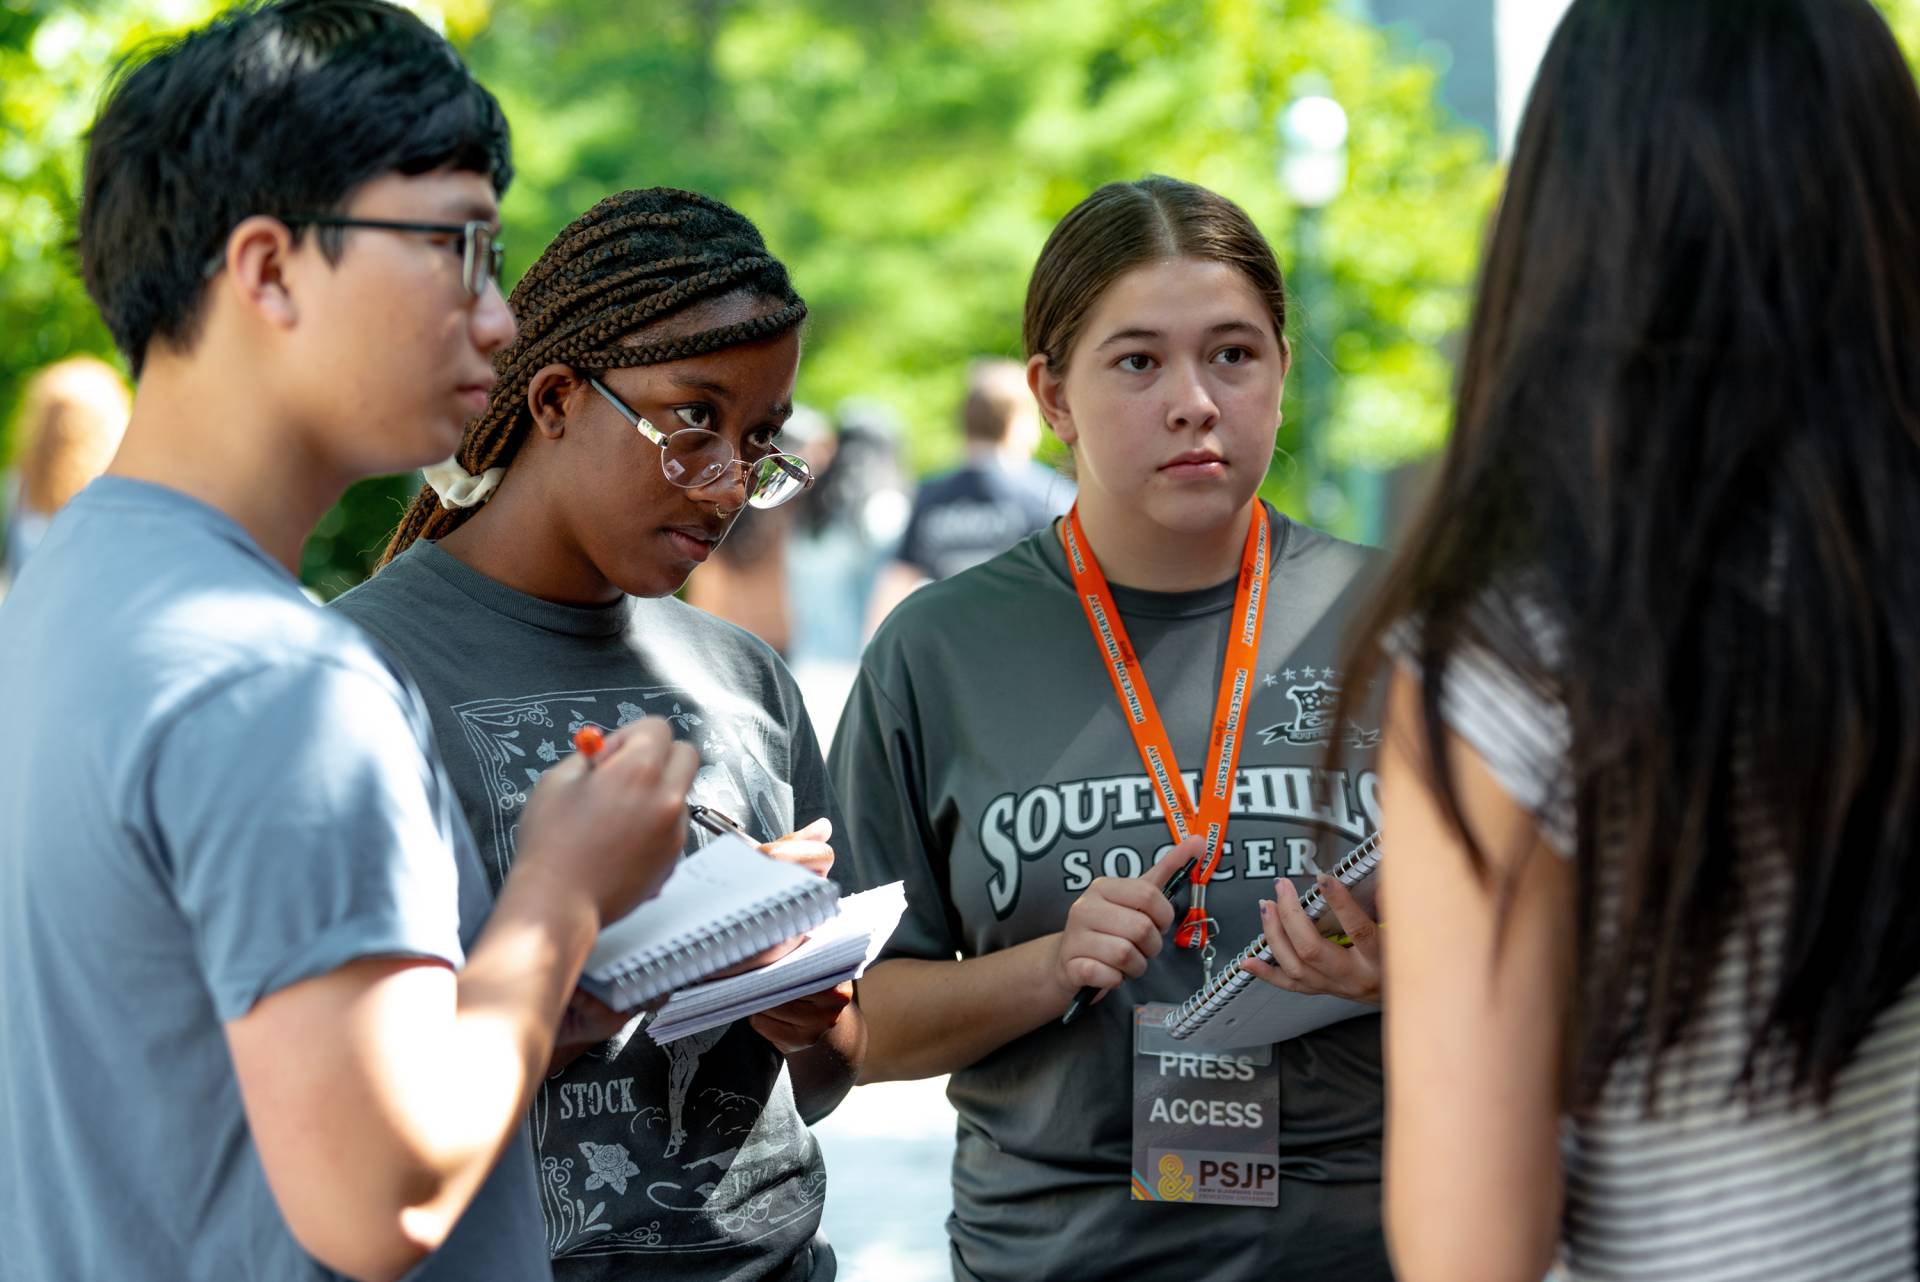 Students in the Princeton Student Journalism Program (PSJP) interviewing people.